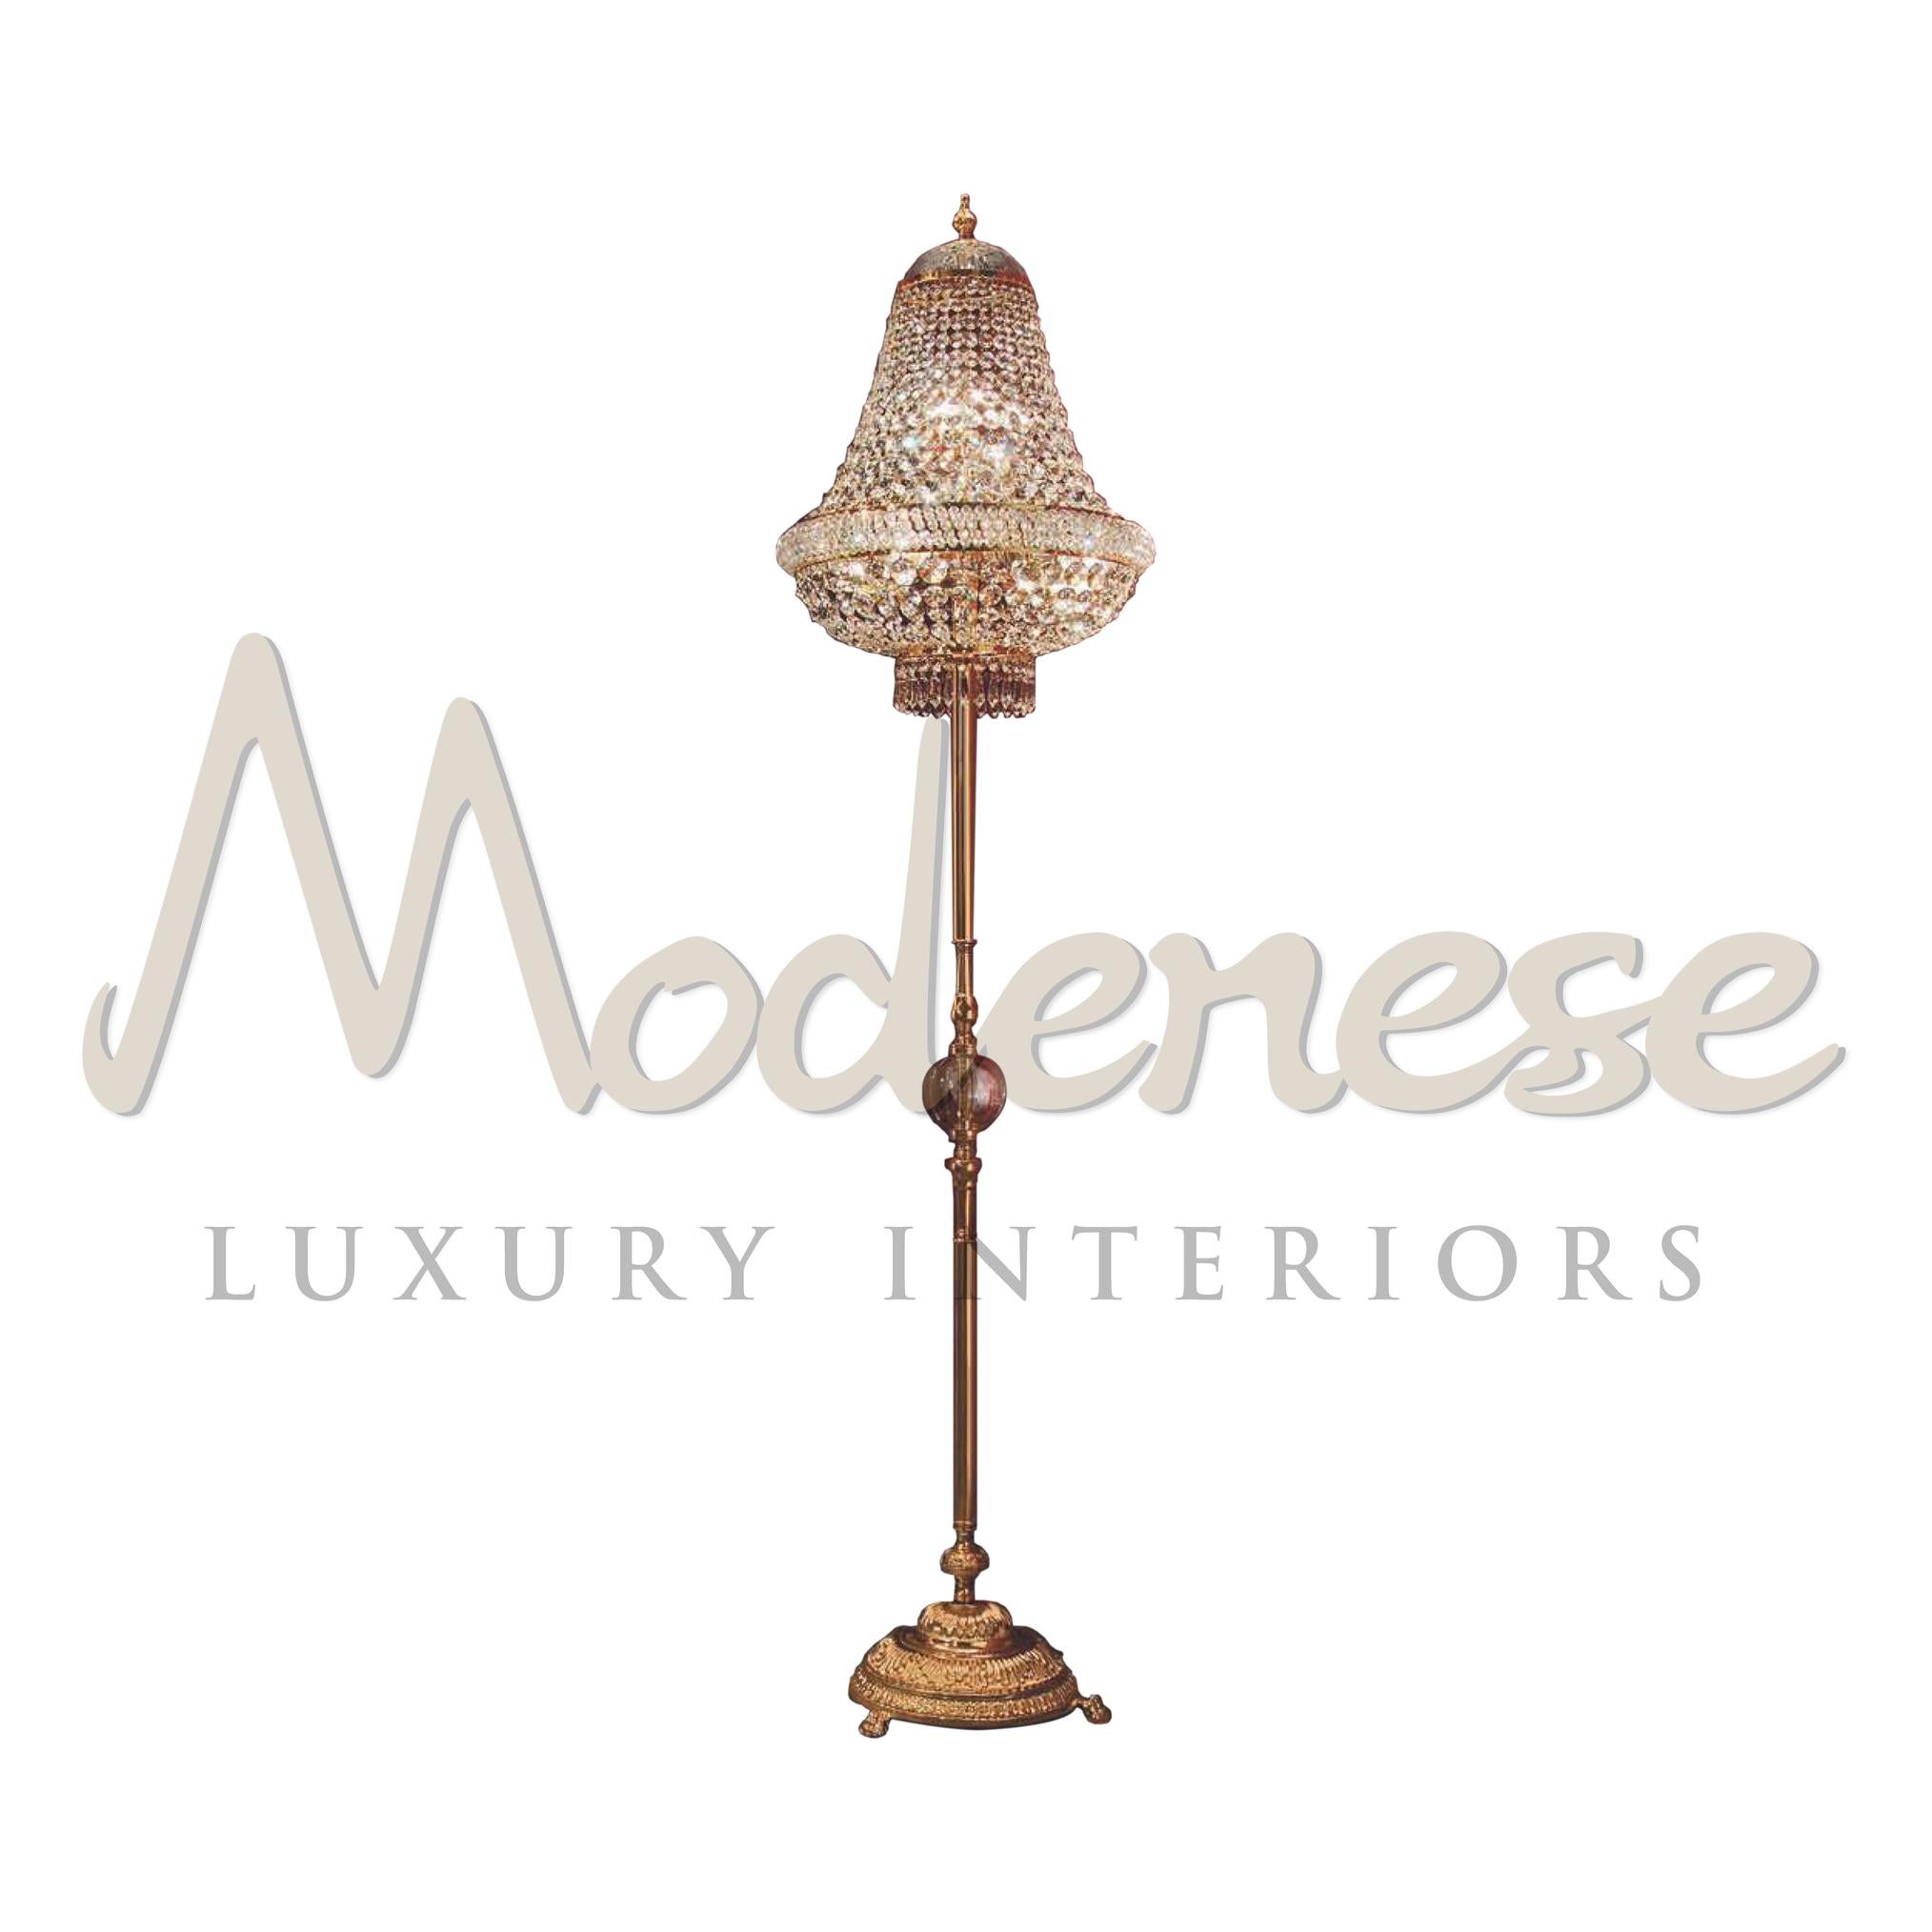 Hand-made 24kt gold plated finished stand for the easel lamp is the perfect basis for large 9-light stand lamp, all ensembled with scholer crystal, by Modenese Gastone luxury interiors. This model requires 9 single E14 screw fit light bulbs (60Watt